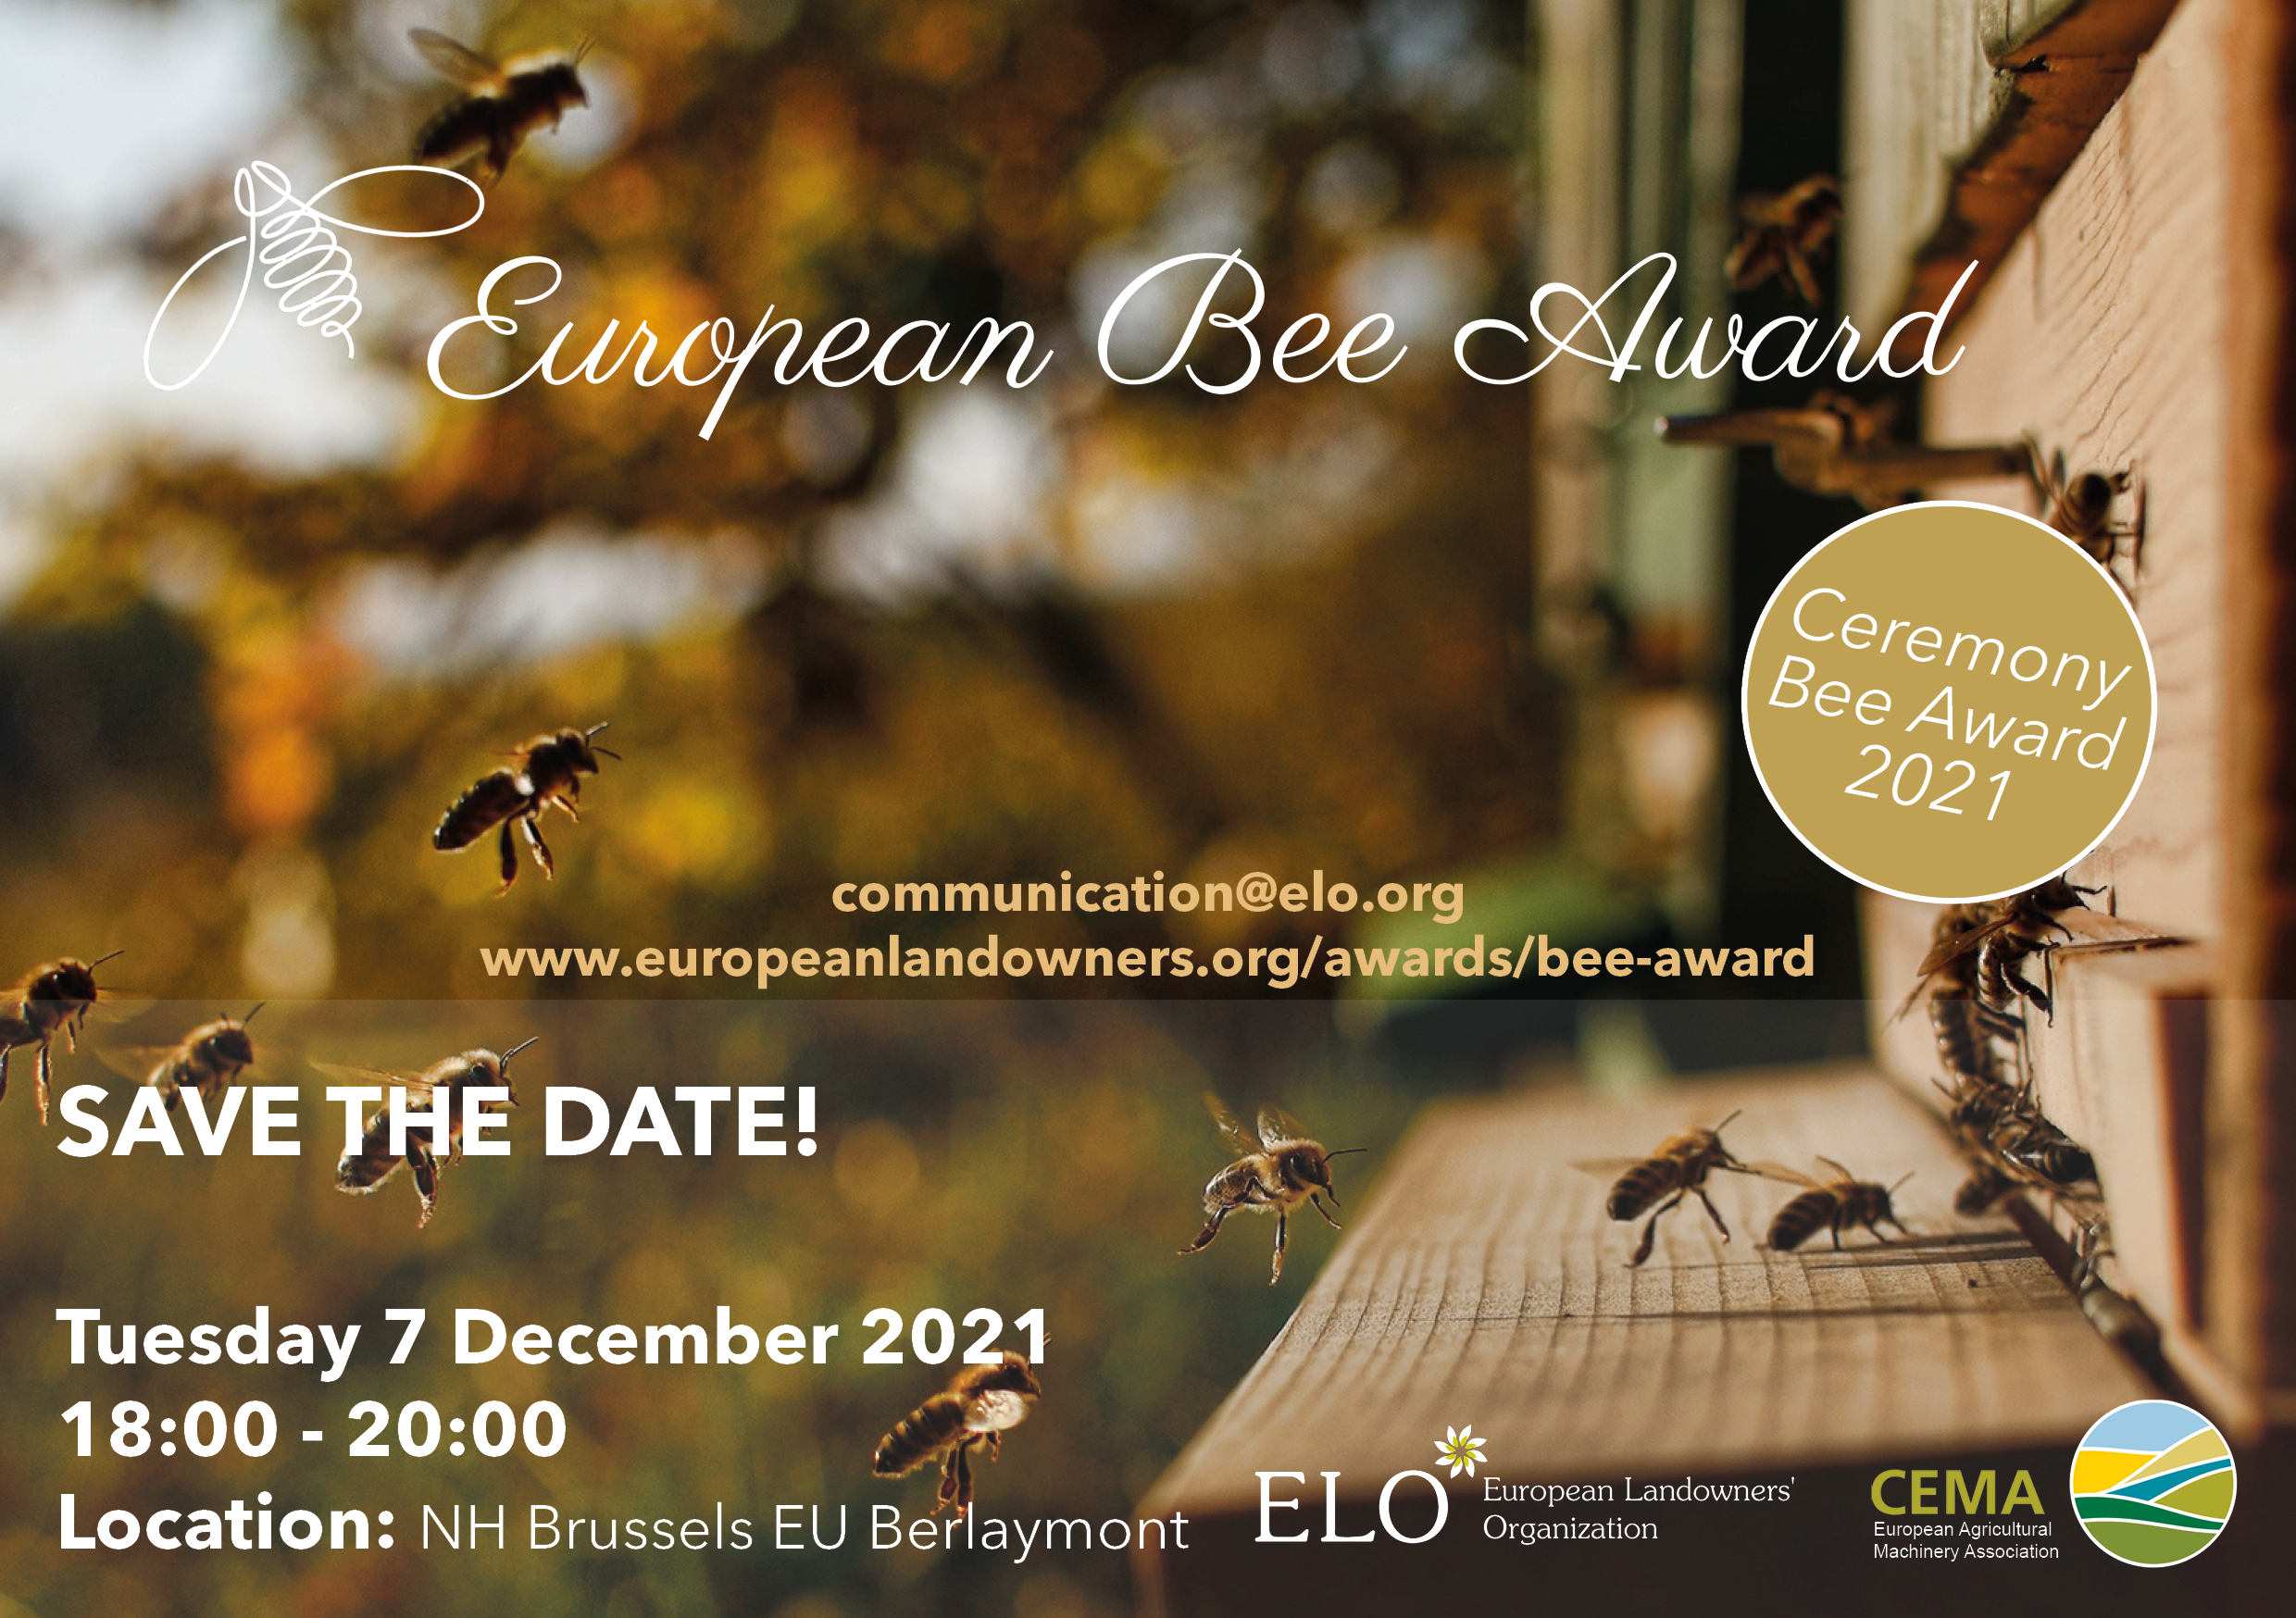 Ceremony Bee Award 2021 Save the Date